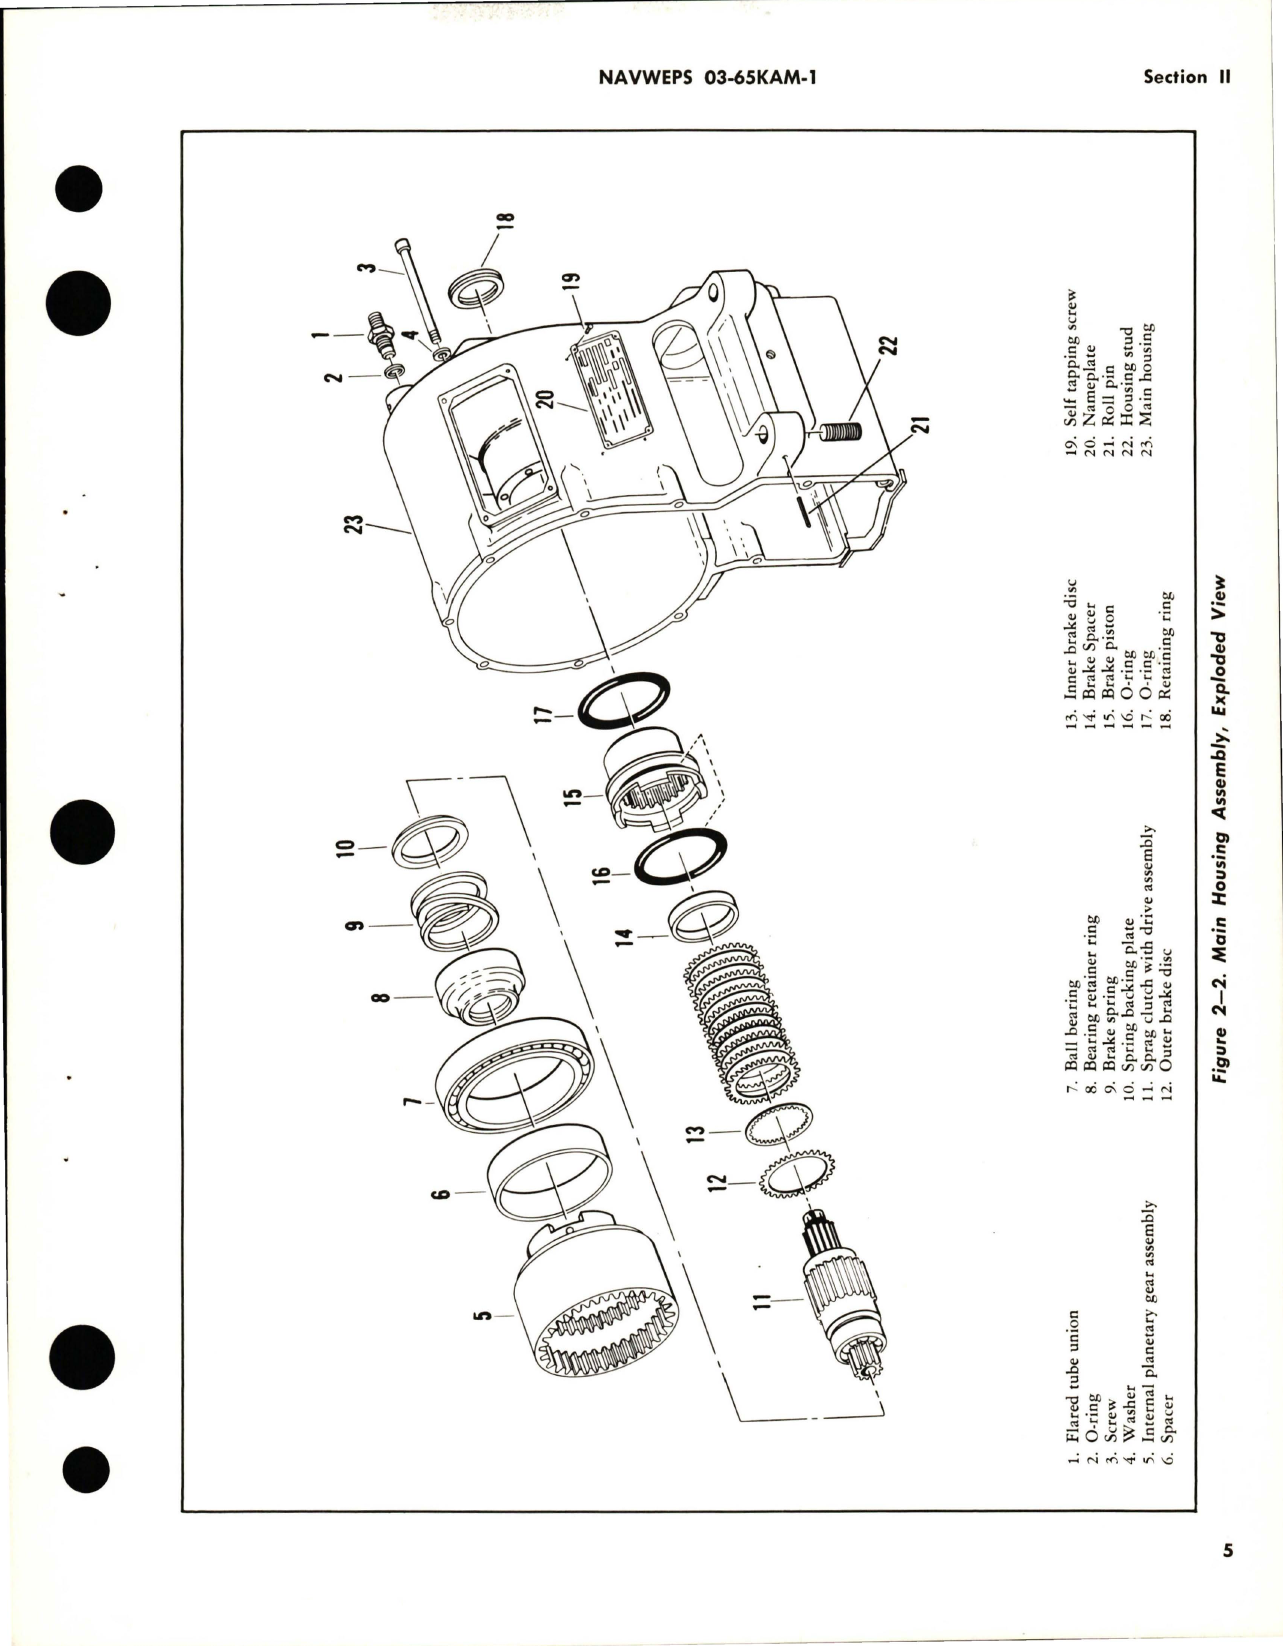 Sample page 9 from AirCorps Library document: Overhaul Instructions for Winch without Motor - Parts WE-2003-1 and K682162-5